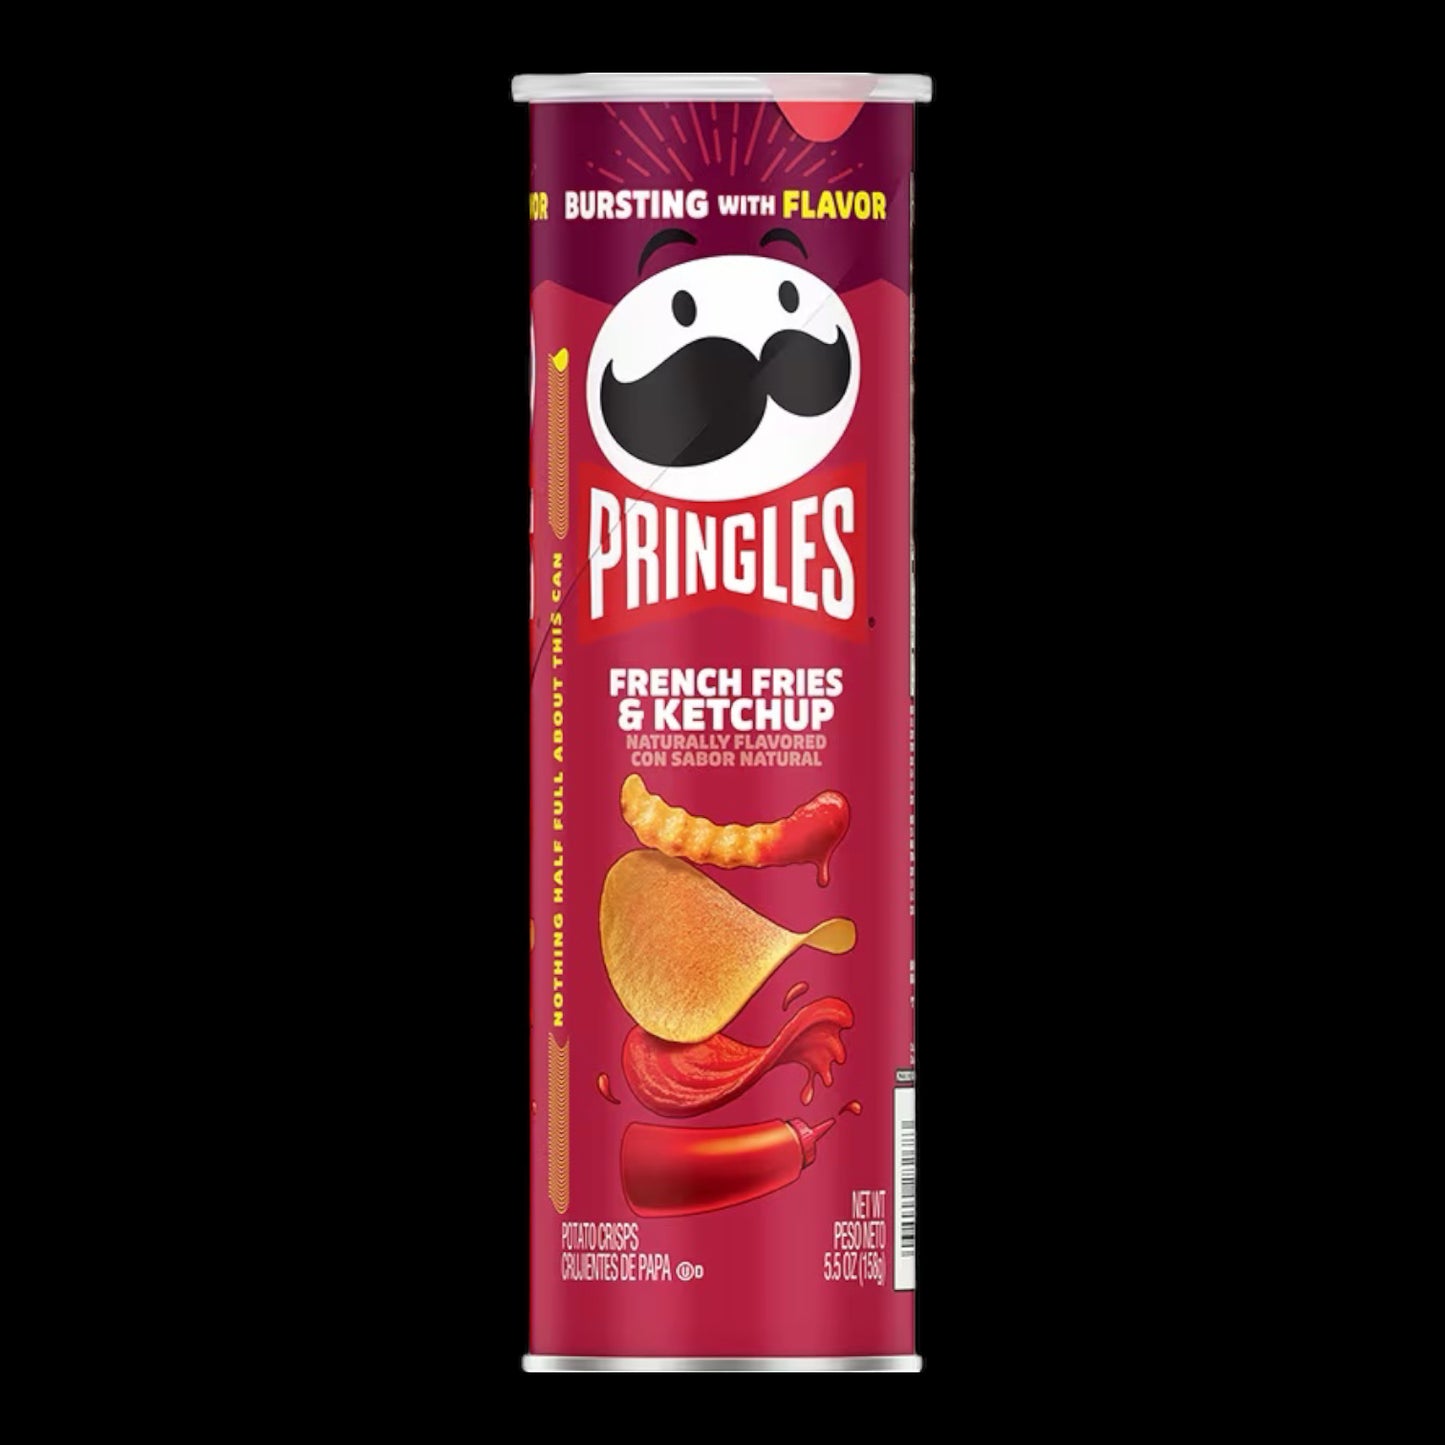 Pringles French Fries & Ketchup 158g - Limited Edition